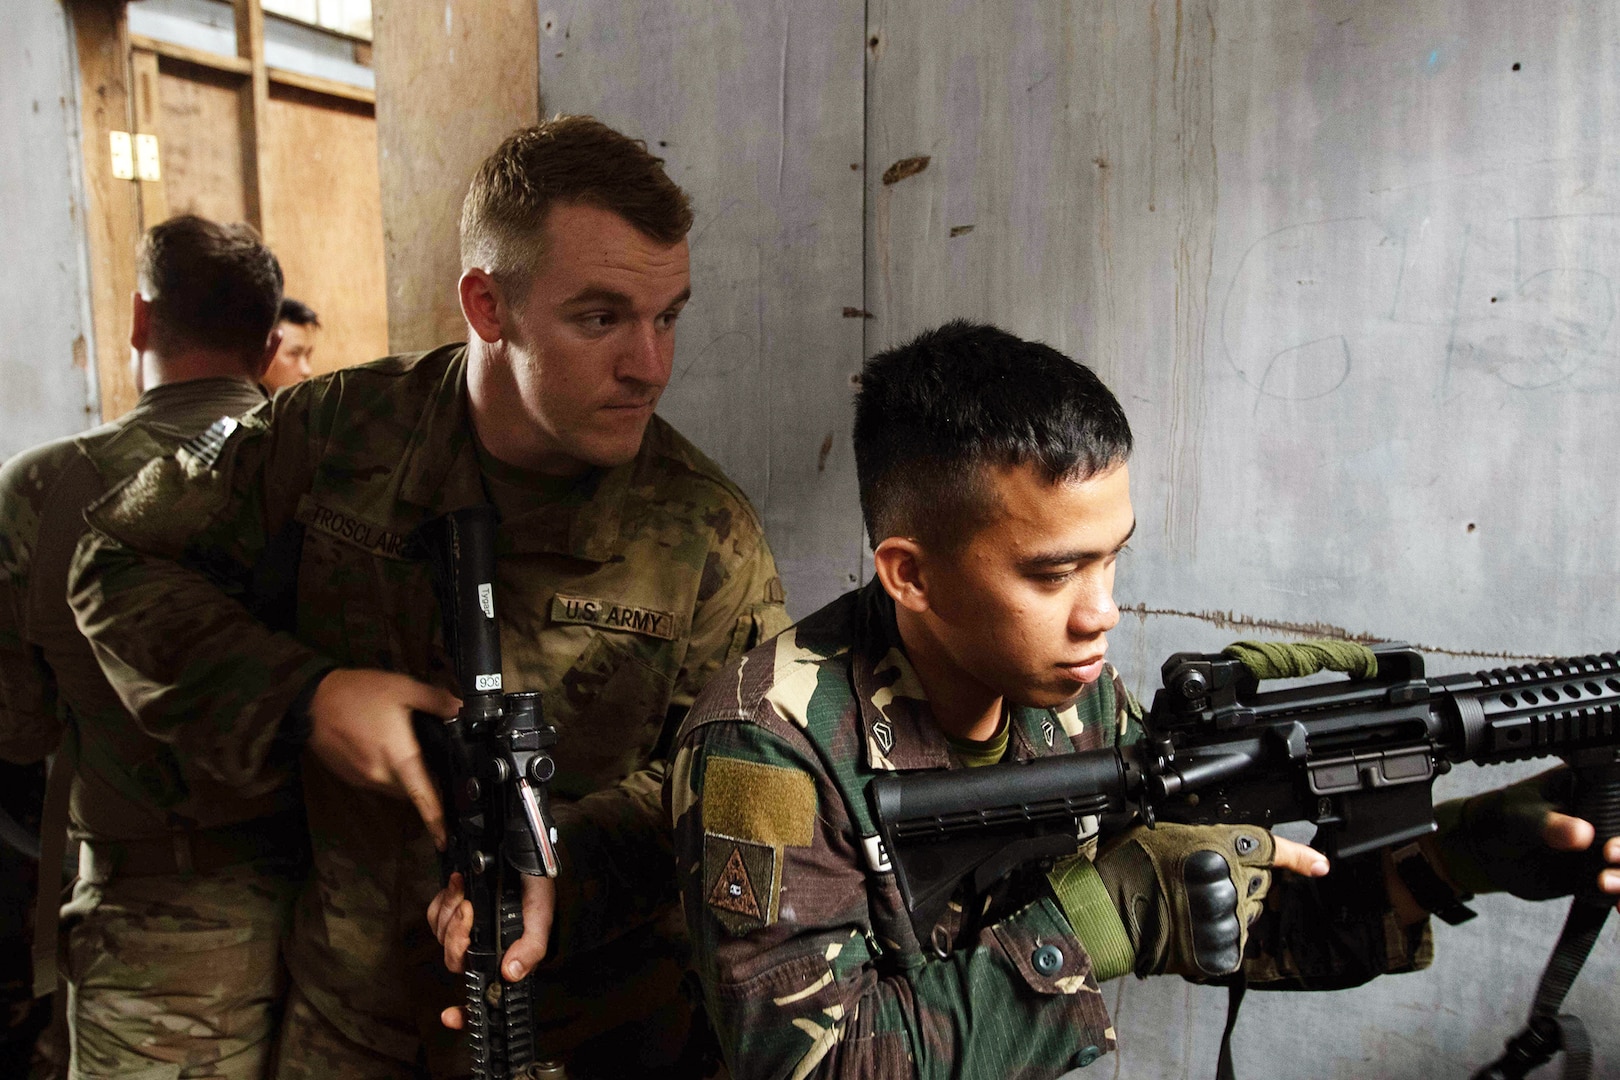 U.S. and Philippine Service Members Train Side-by-side during Salaknib 2019